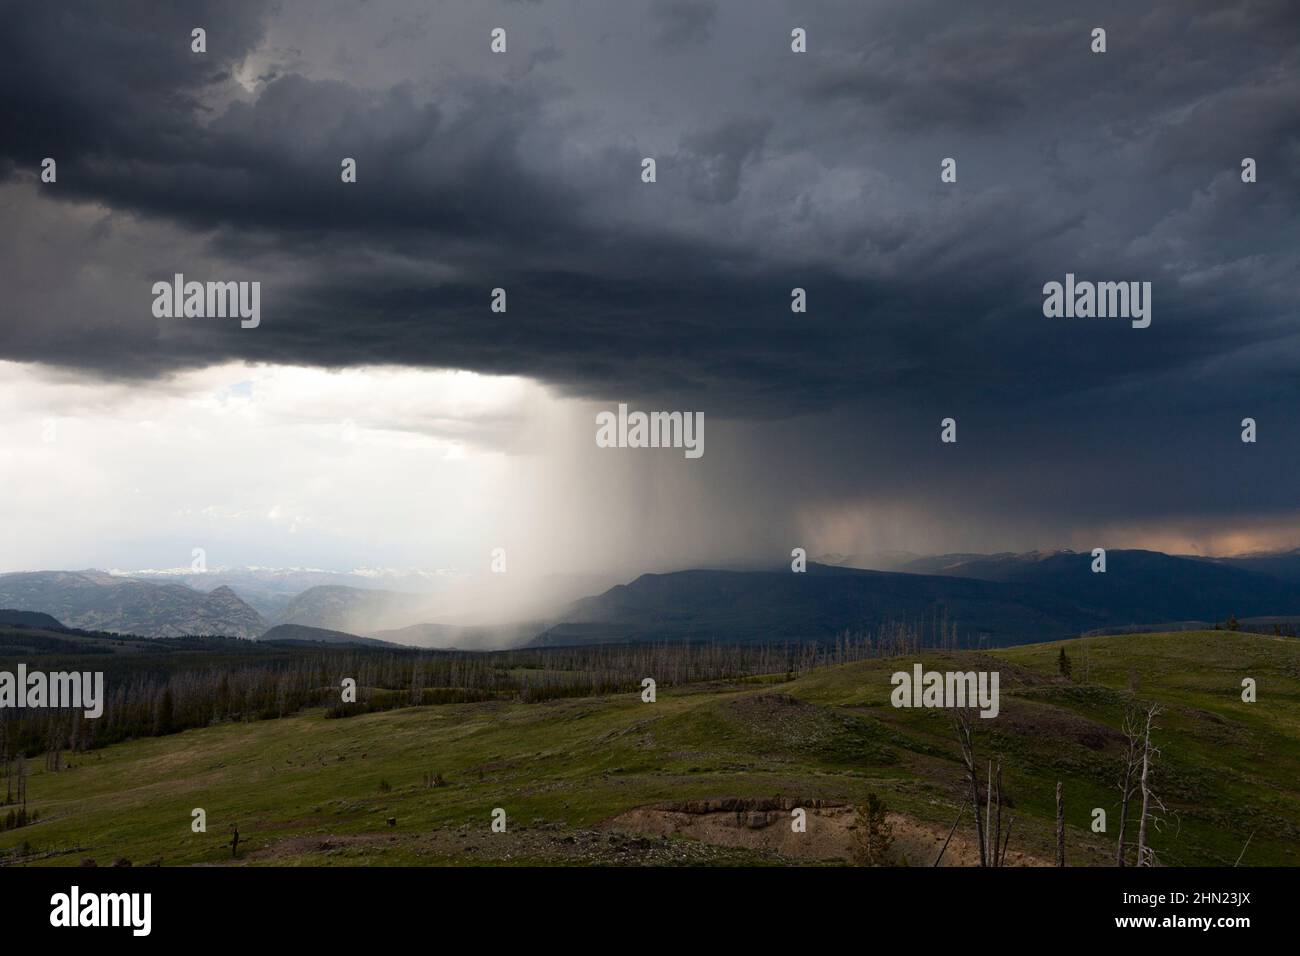 Dunraven Pass, thunderstorm in sunmmer, Dunraven Pass, Yellowstone NP, Wyoming, USA Stock Photo